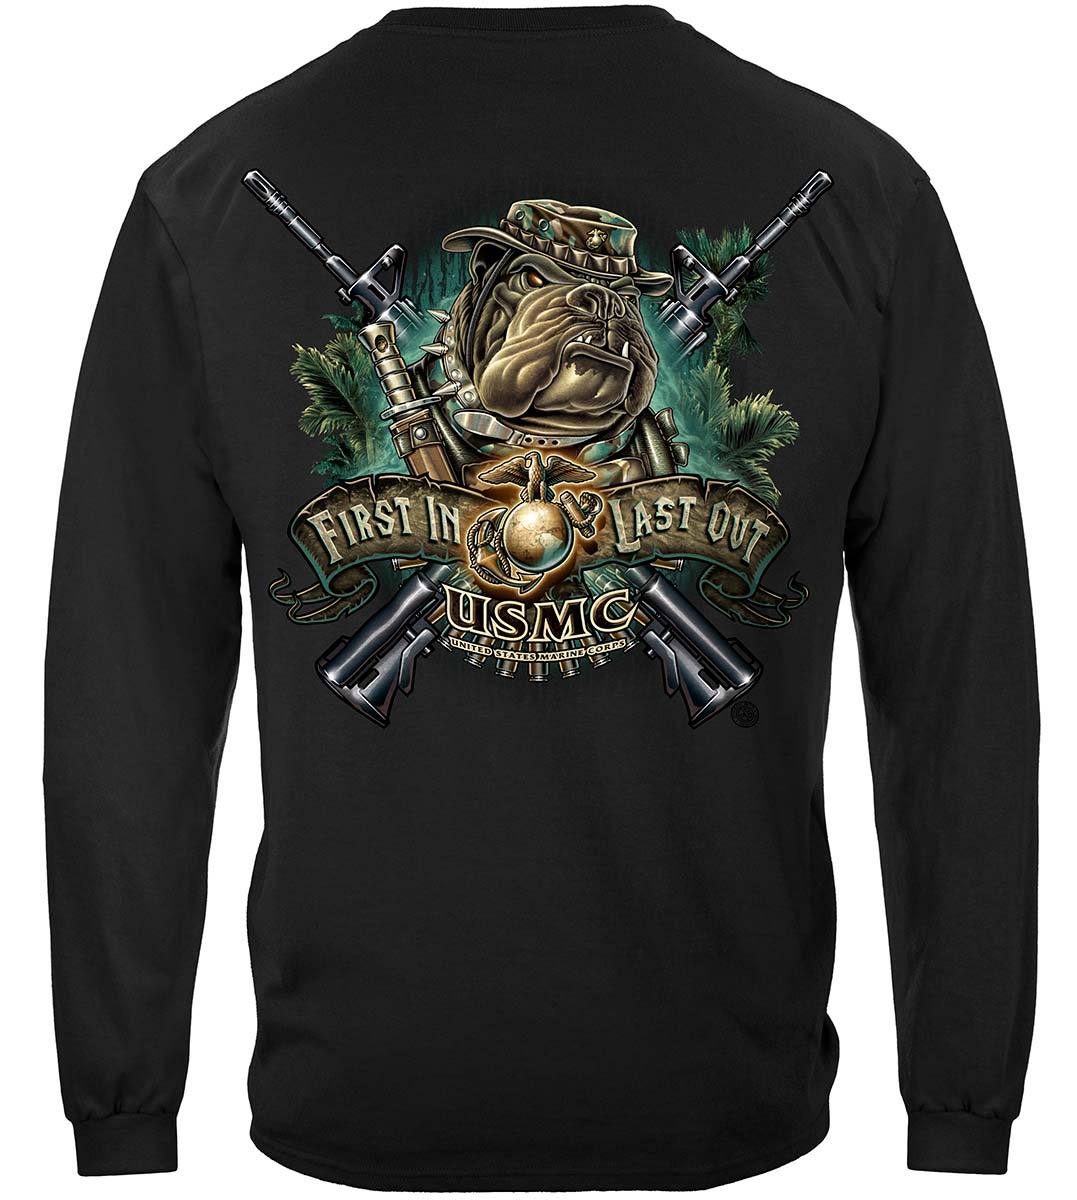 Marine Devil Dog First In Last Out Premium Hooded Sweat Shirt